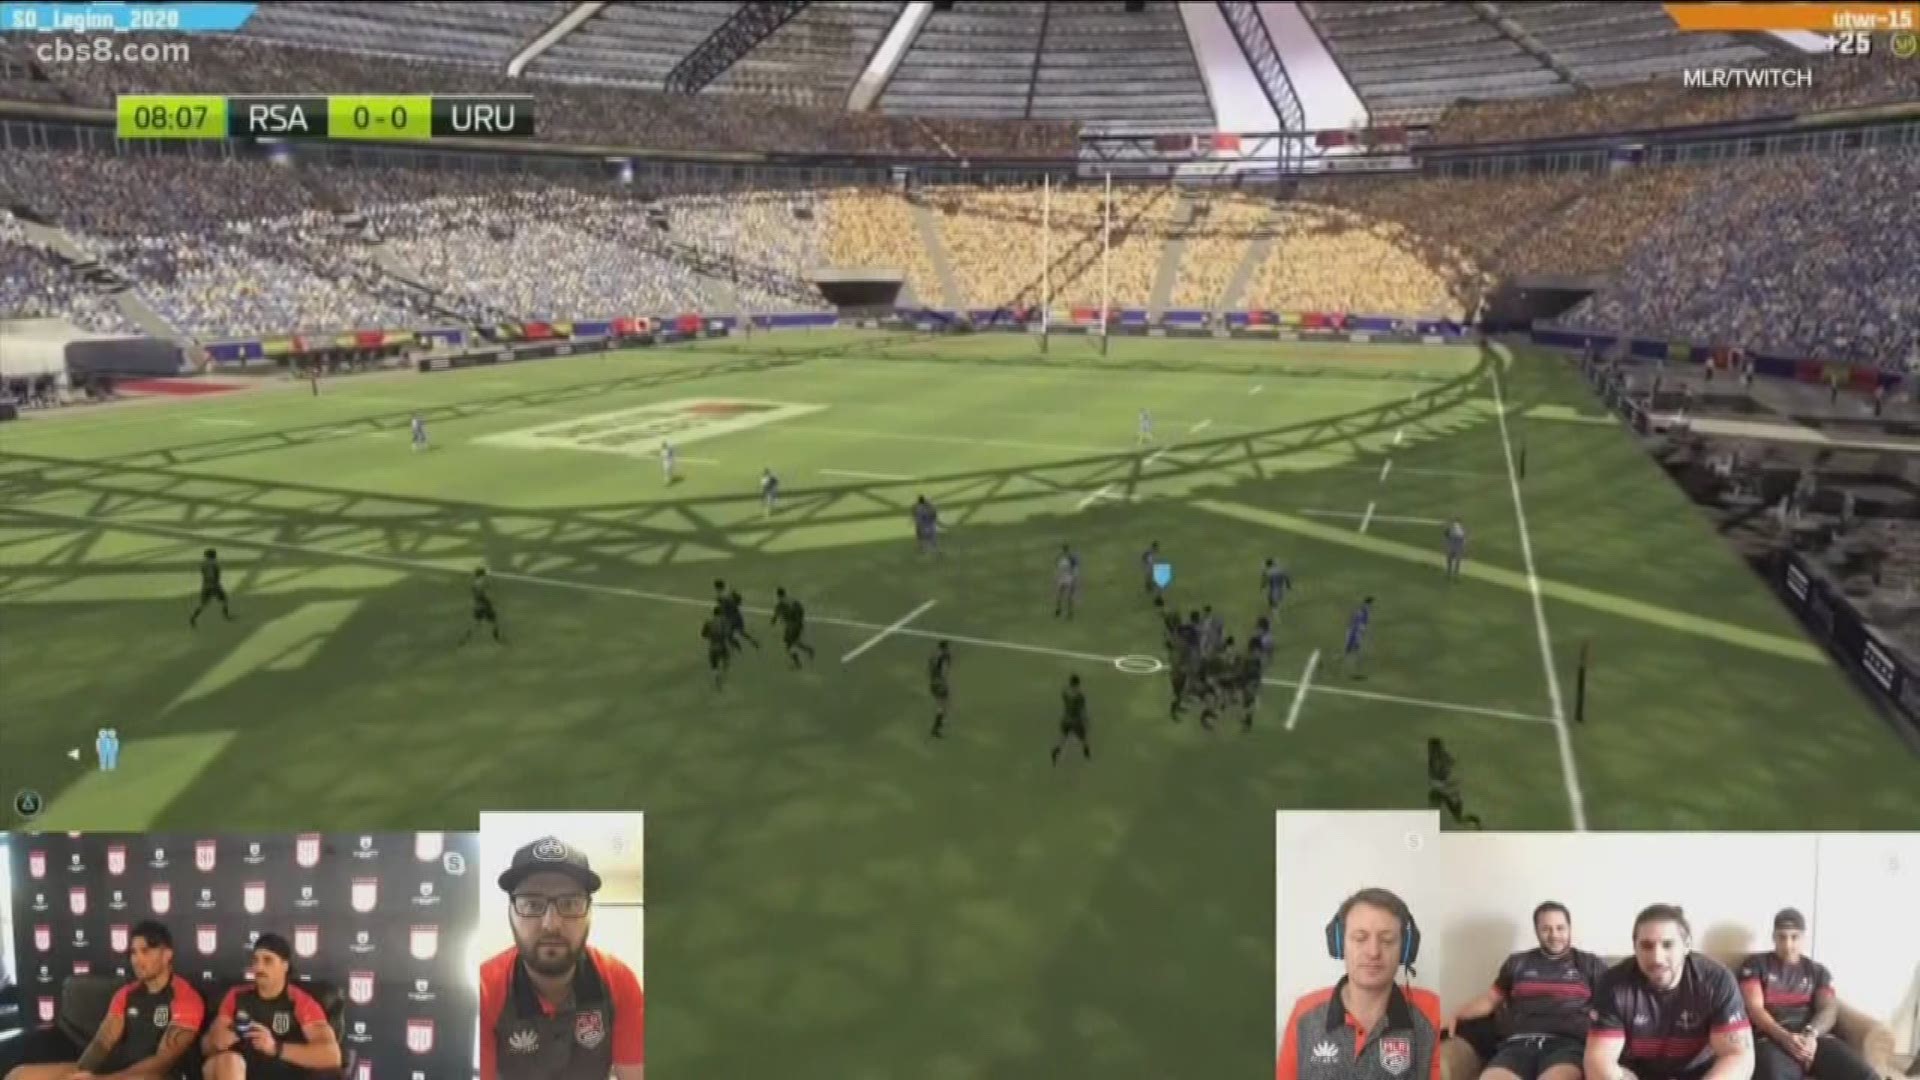 Both NASCAR and Major League Rugby have decided to take their sport into the digital realm.